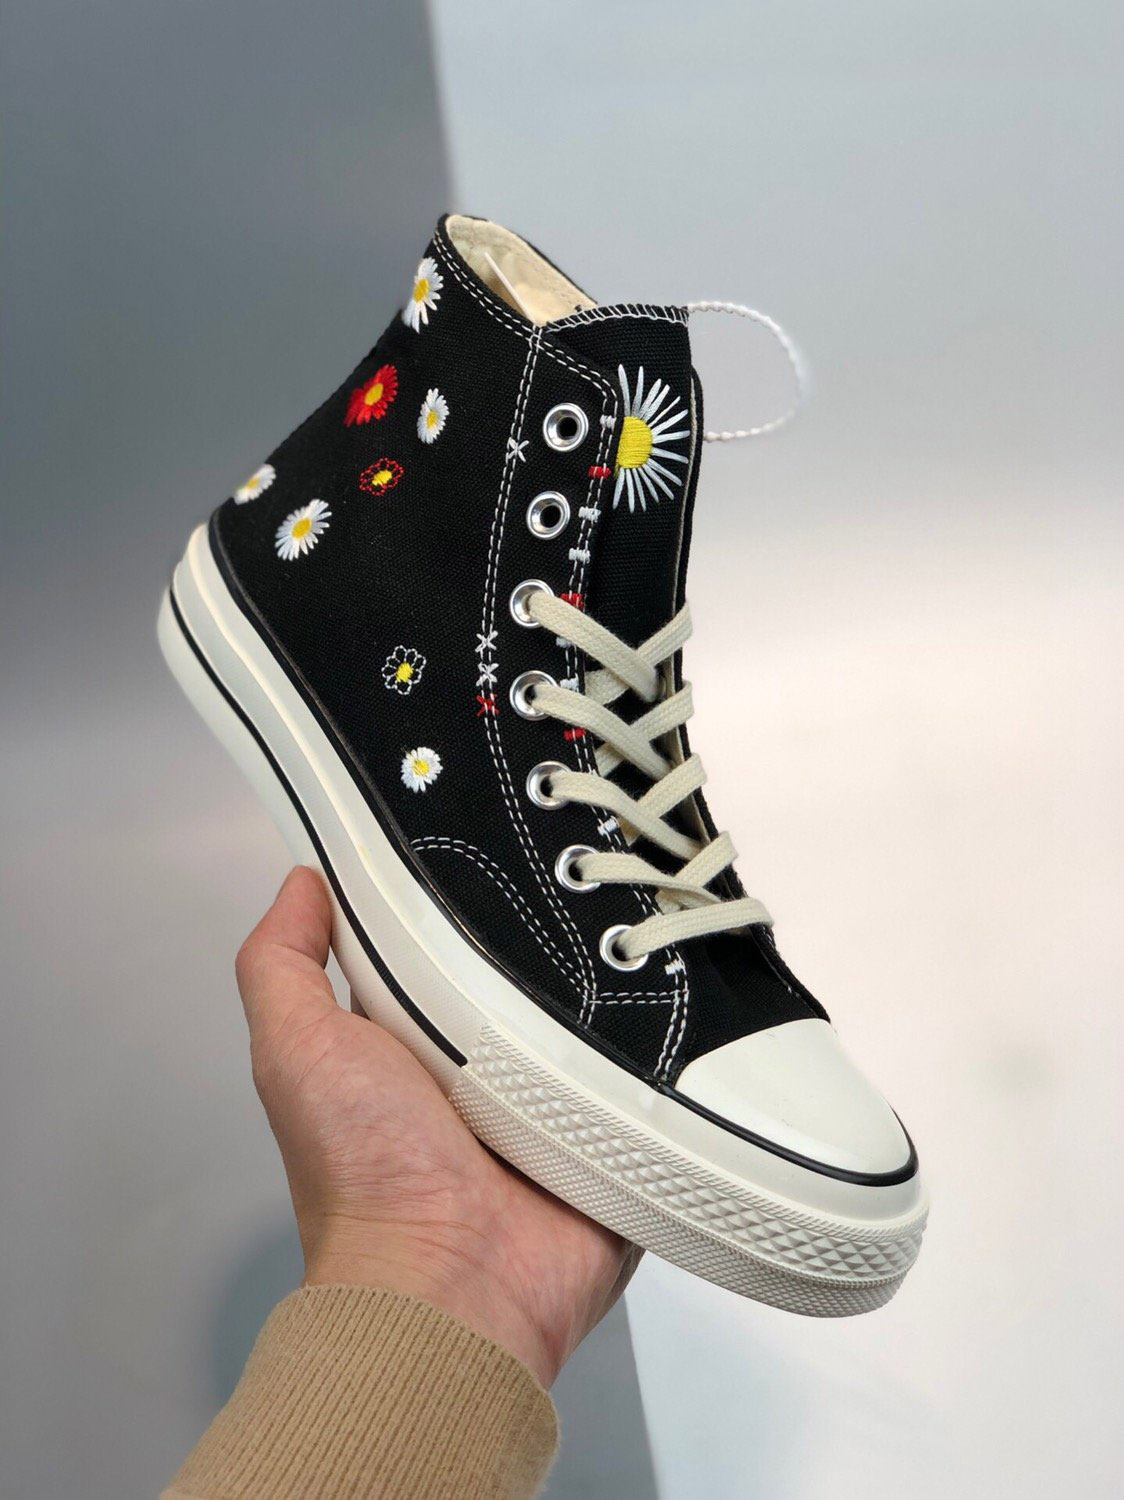 Converse Embroidered Floral Chuck Taylor All Star Black/Natural Ivory